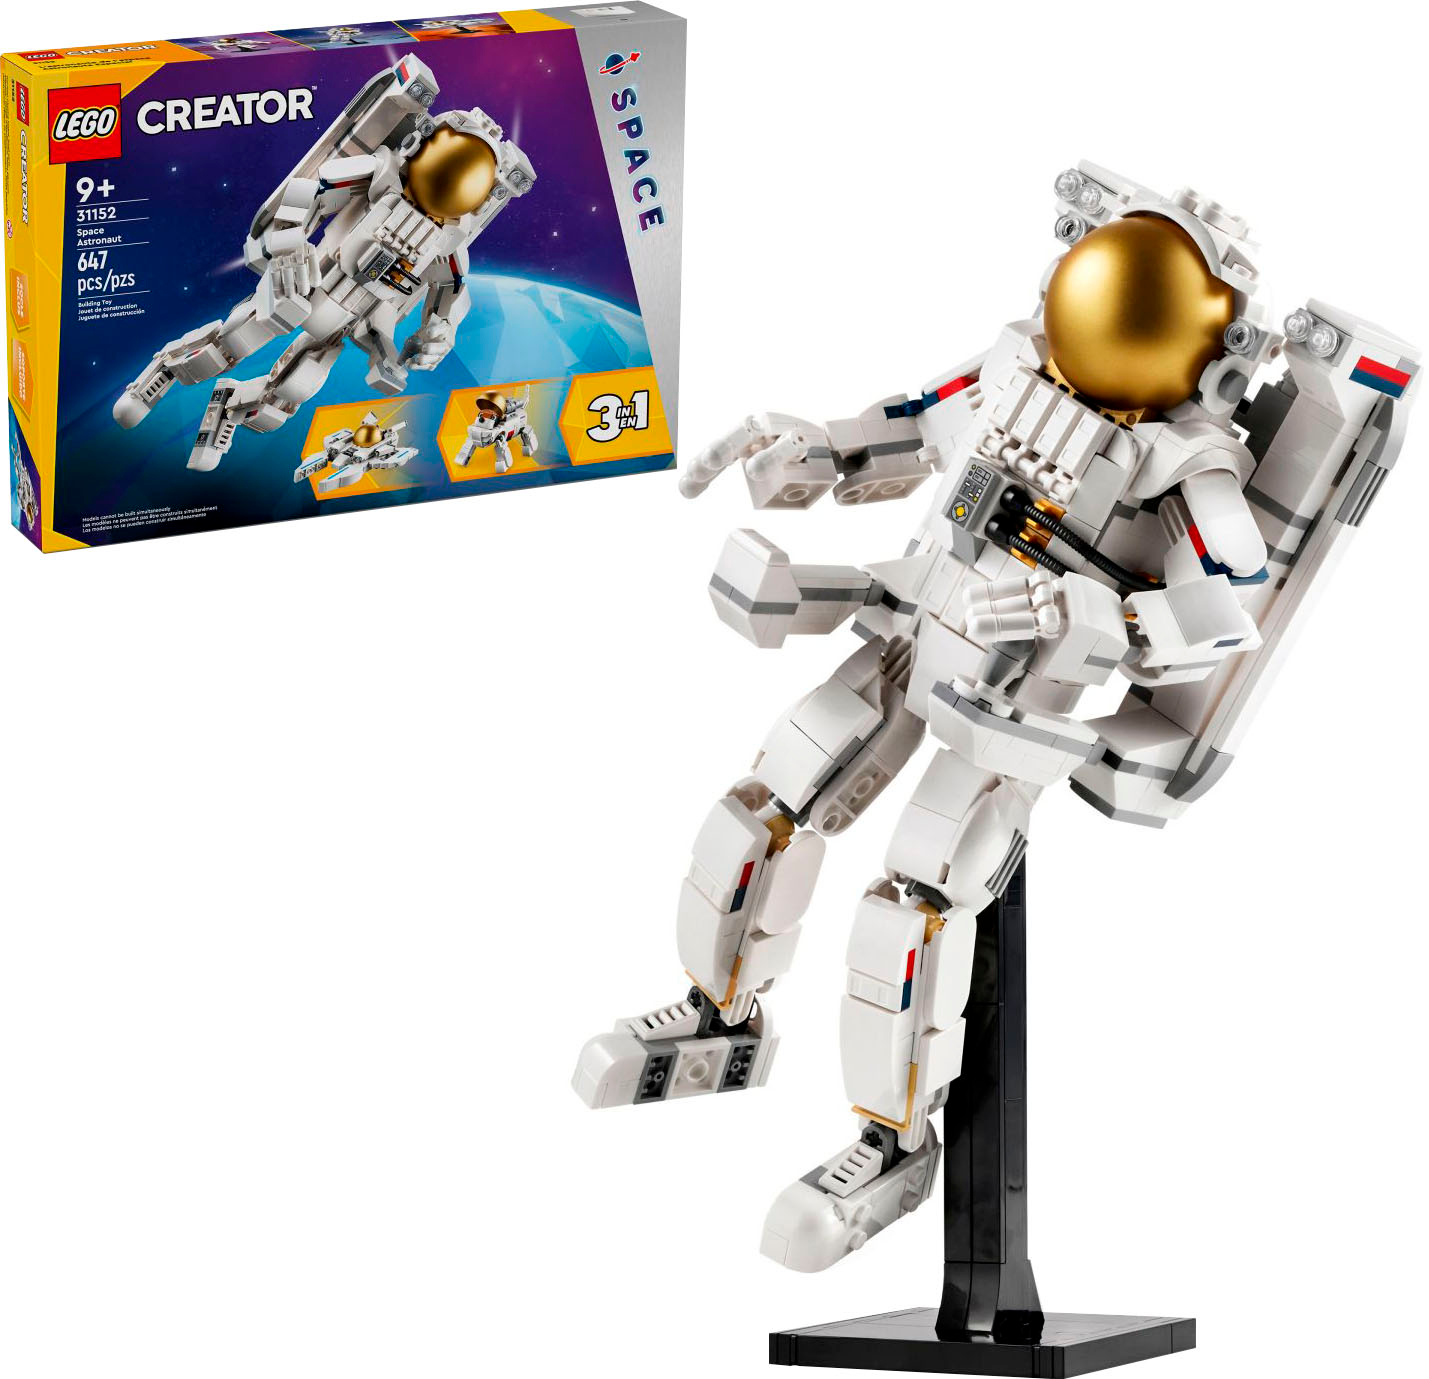 LEGO Creator 3 in 1 Space Astronaut Toy Set, Science Toy for Kids 31152  6465048 - Best Buy